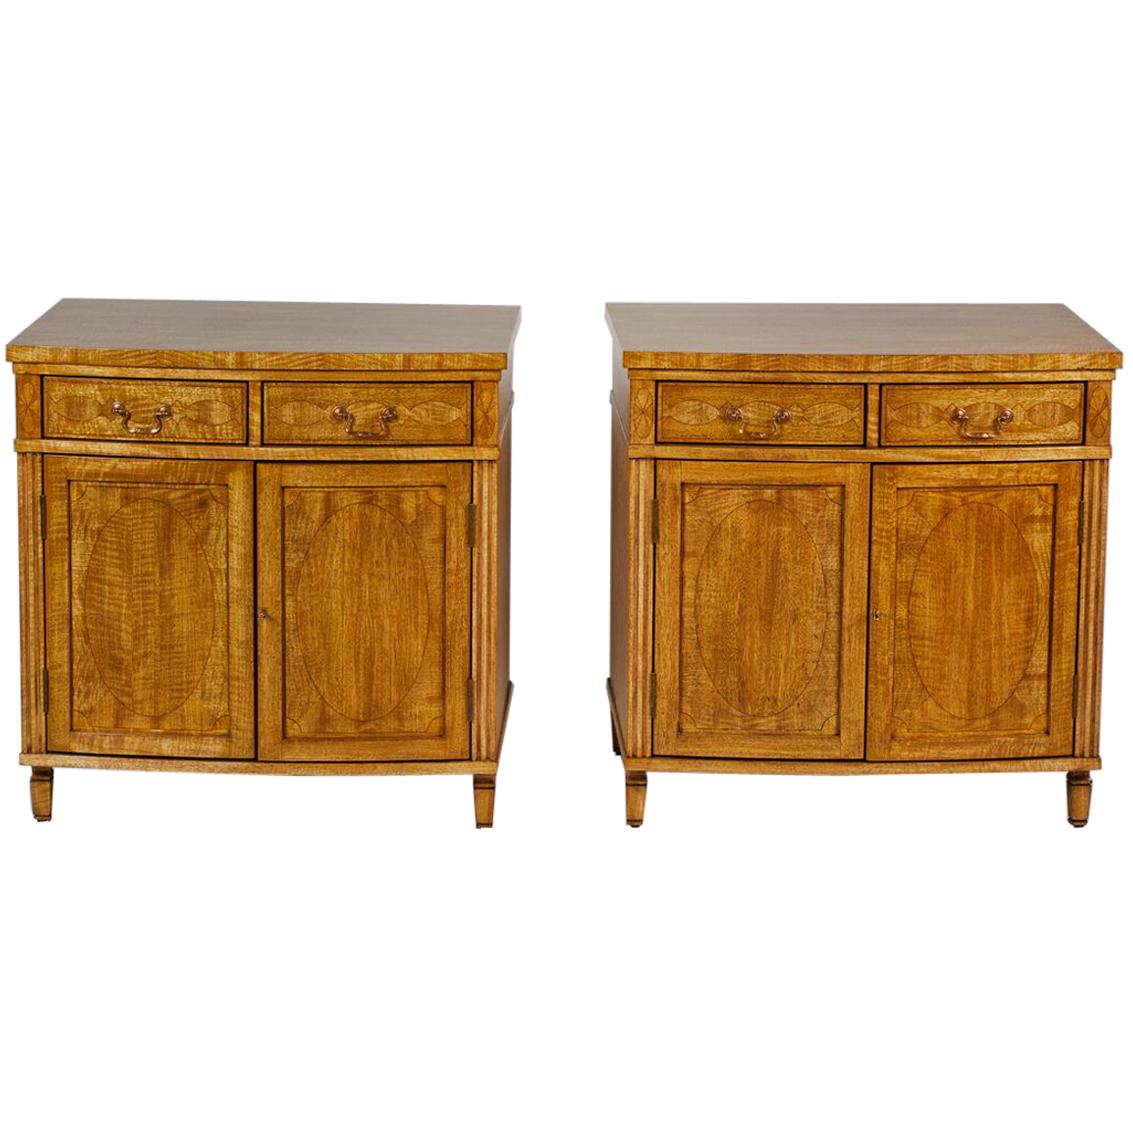 Pair of Sheraton Revival Style Custom Cabinets in Satinwood with Inlay